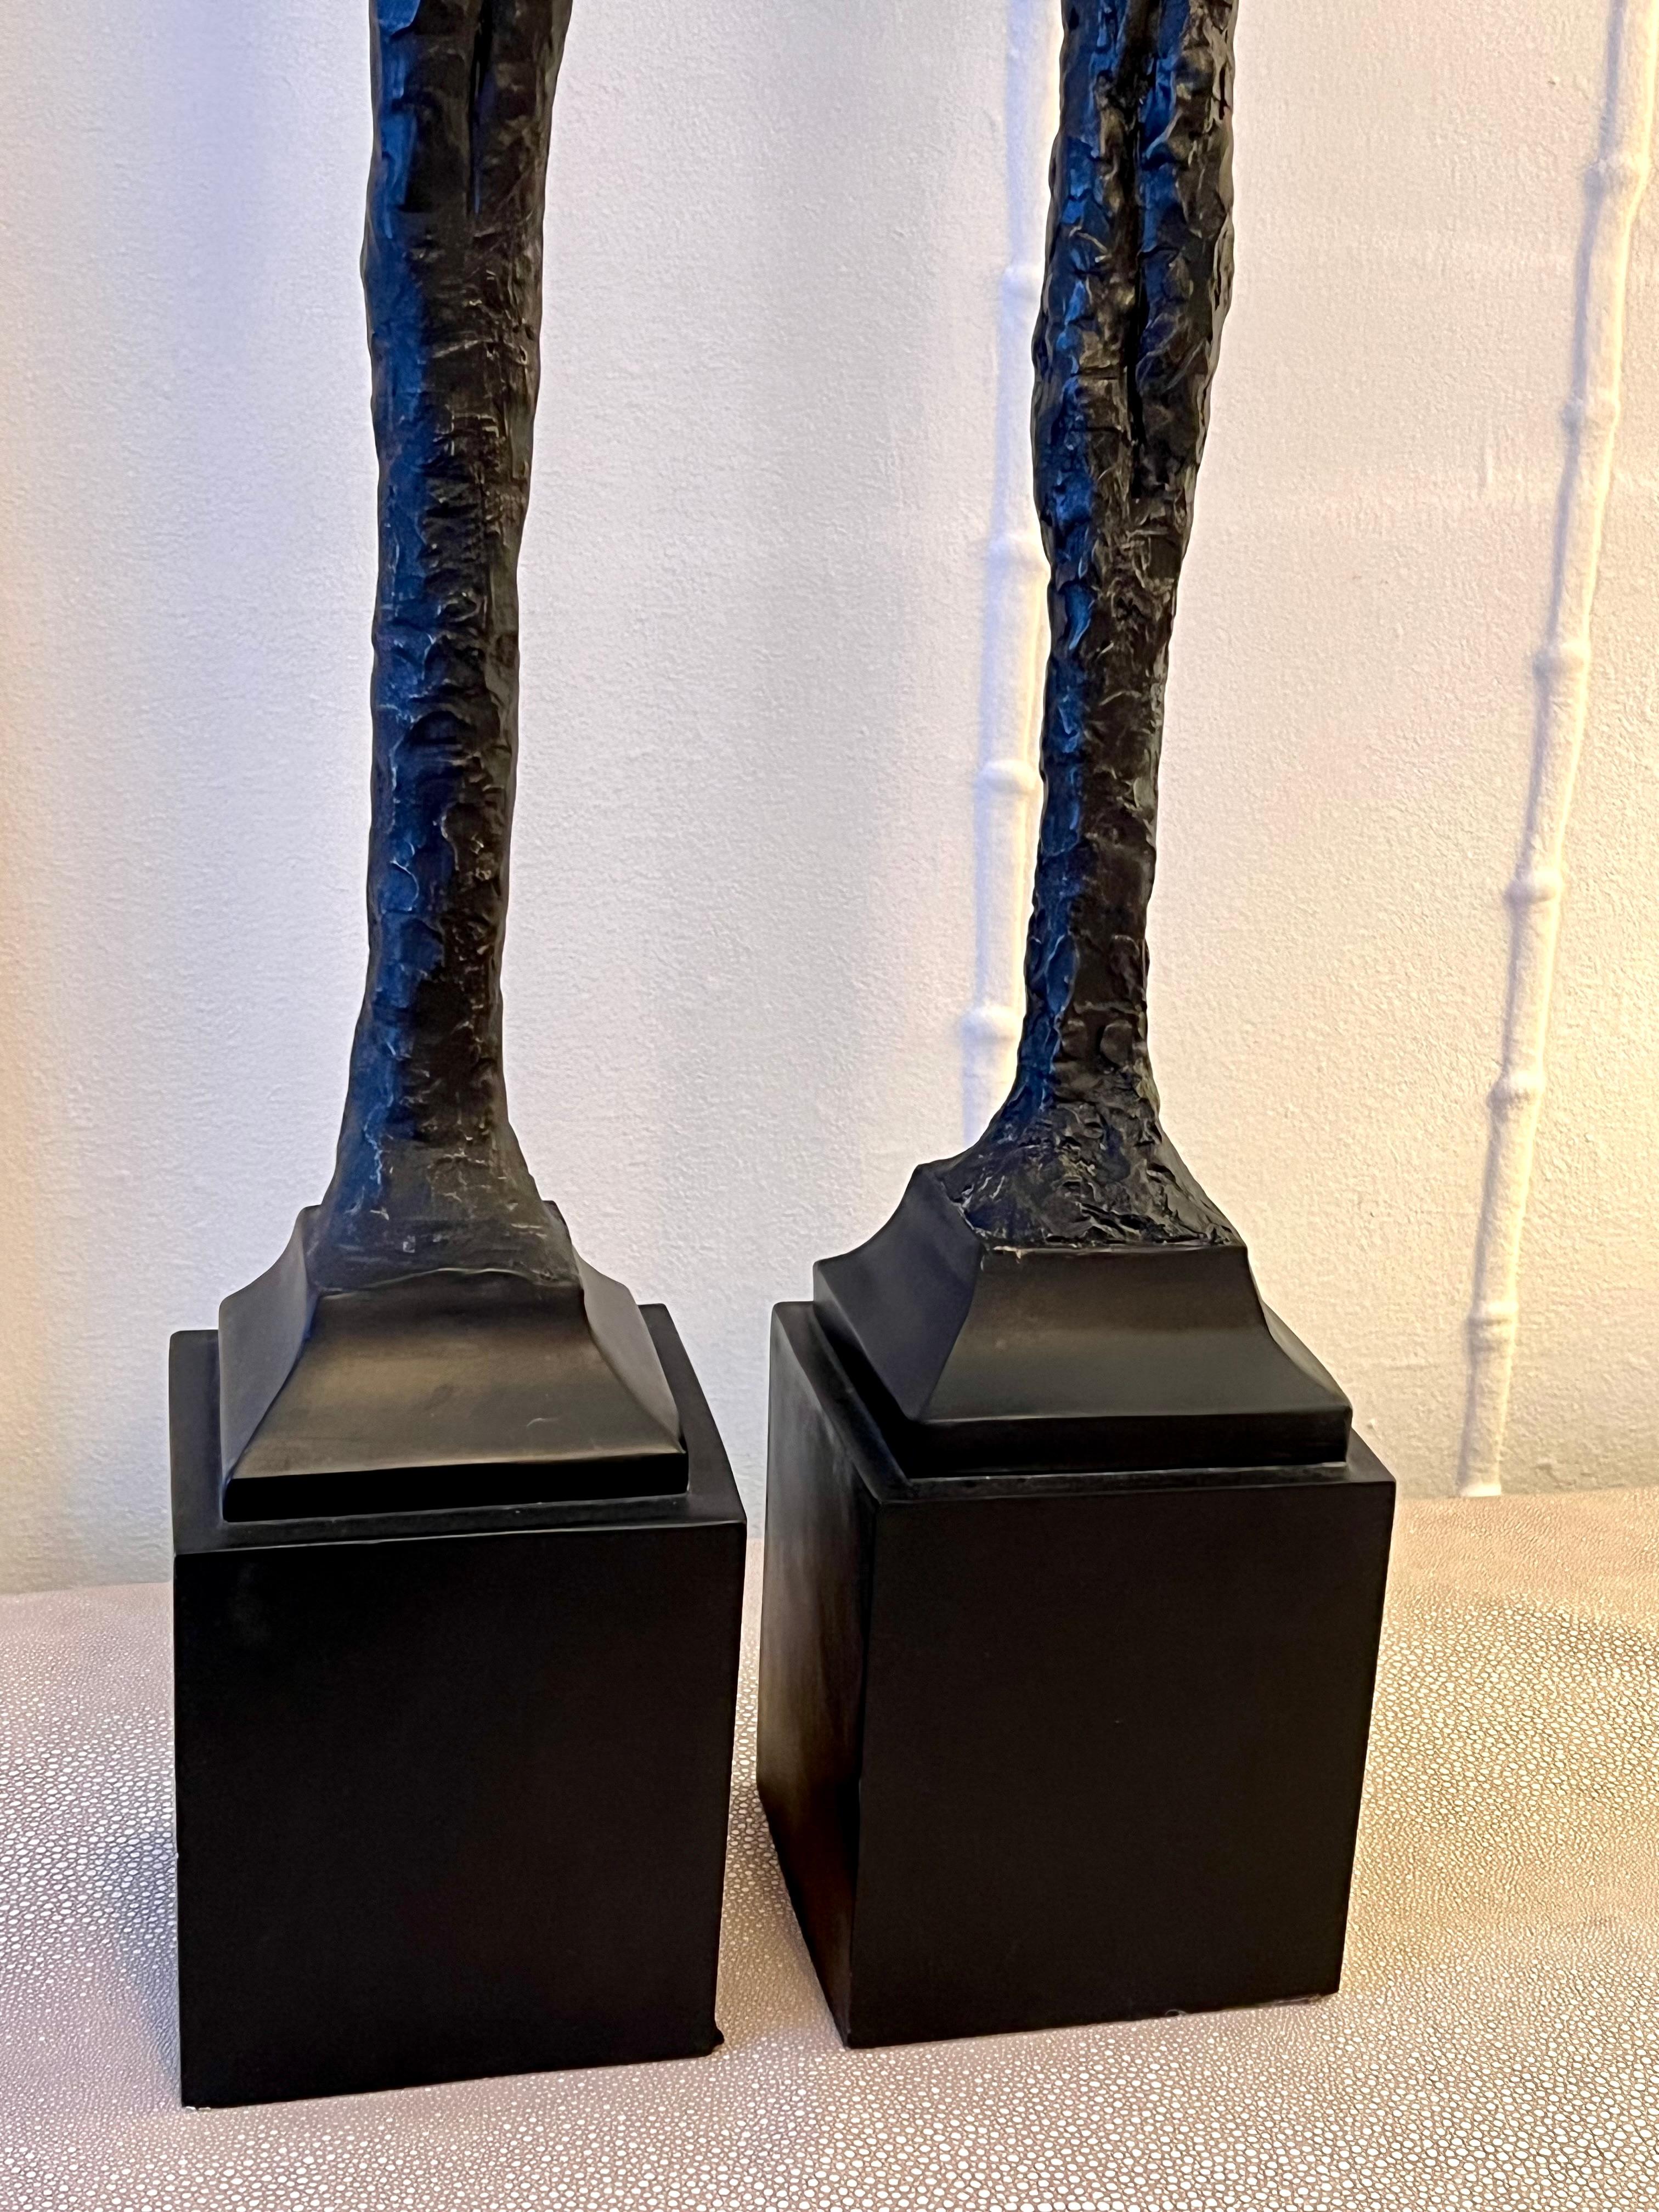 20th Century Pair of Figurative Statues in the Style of Giacometti